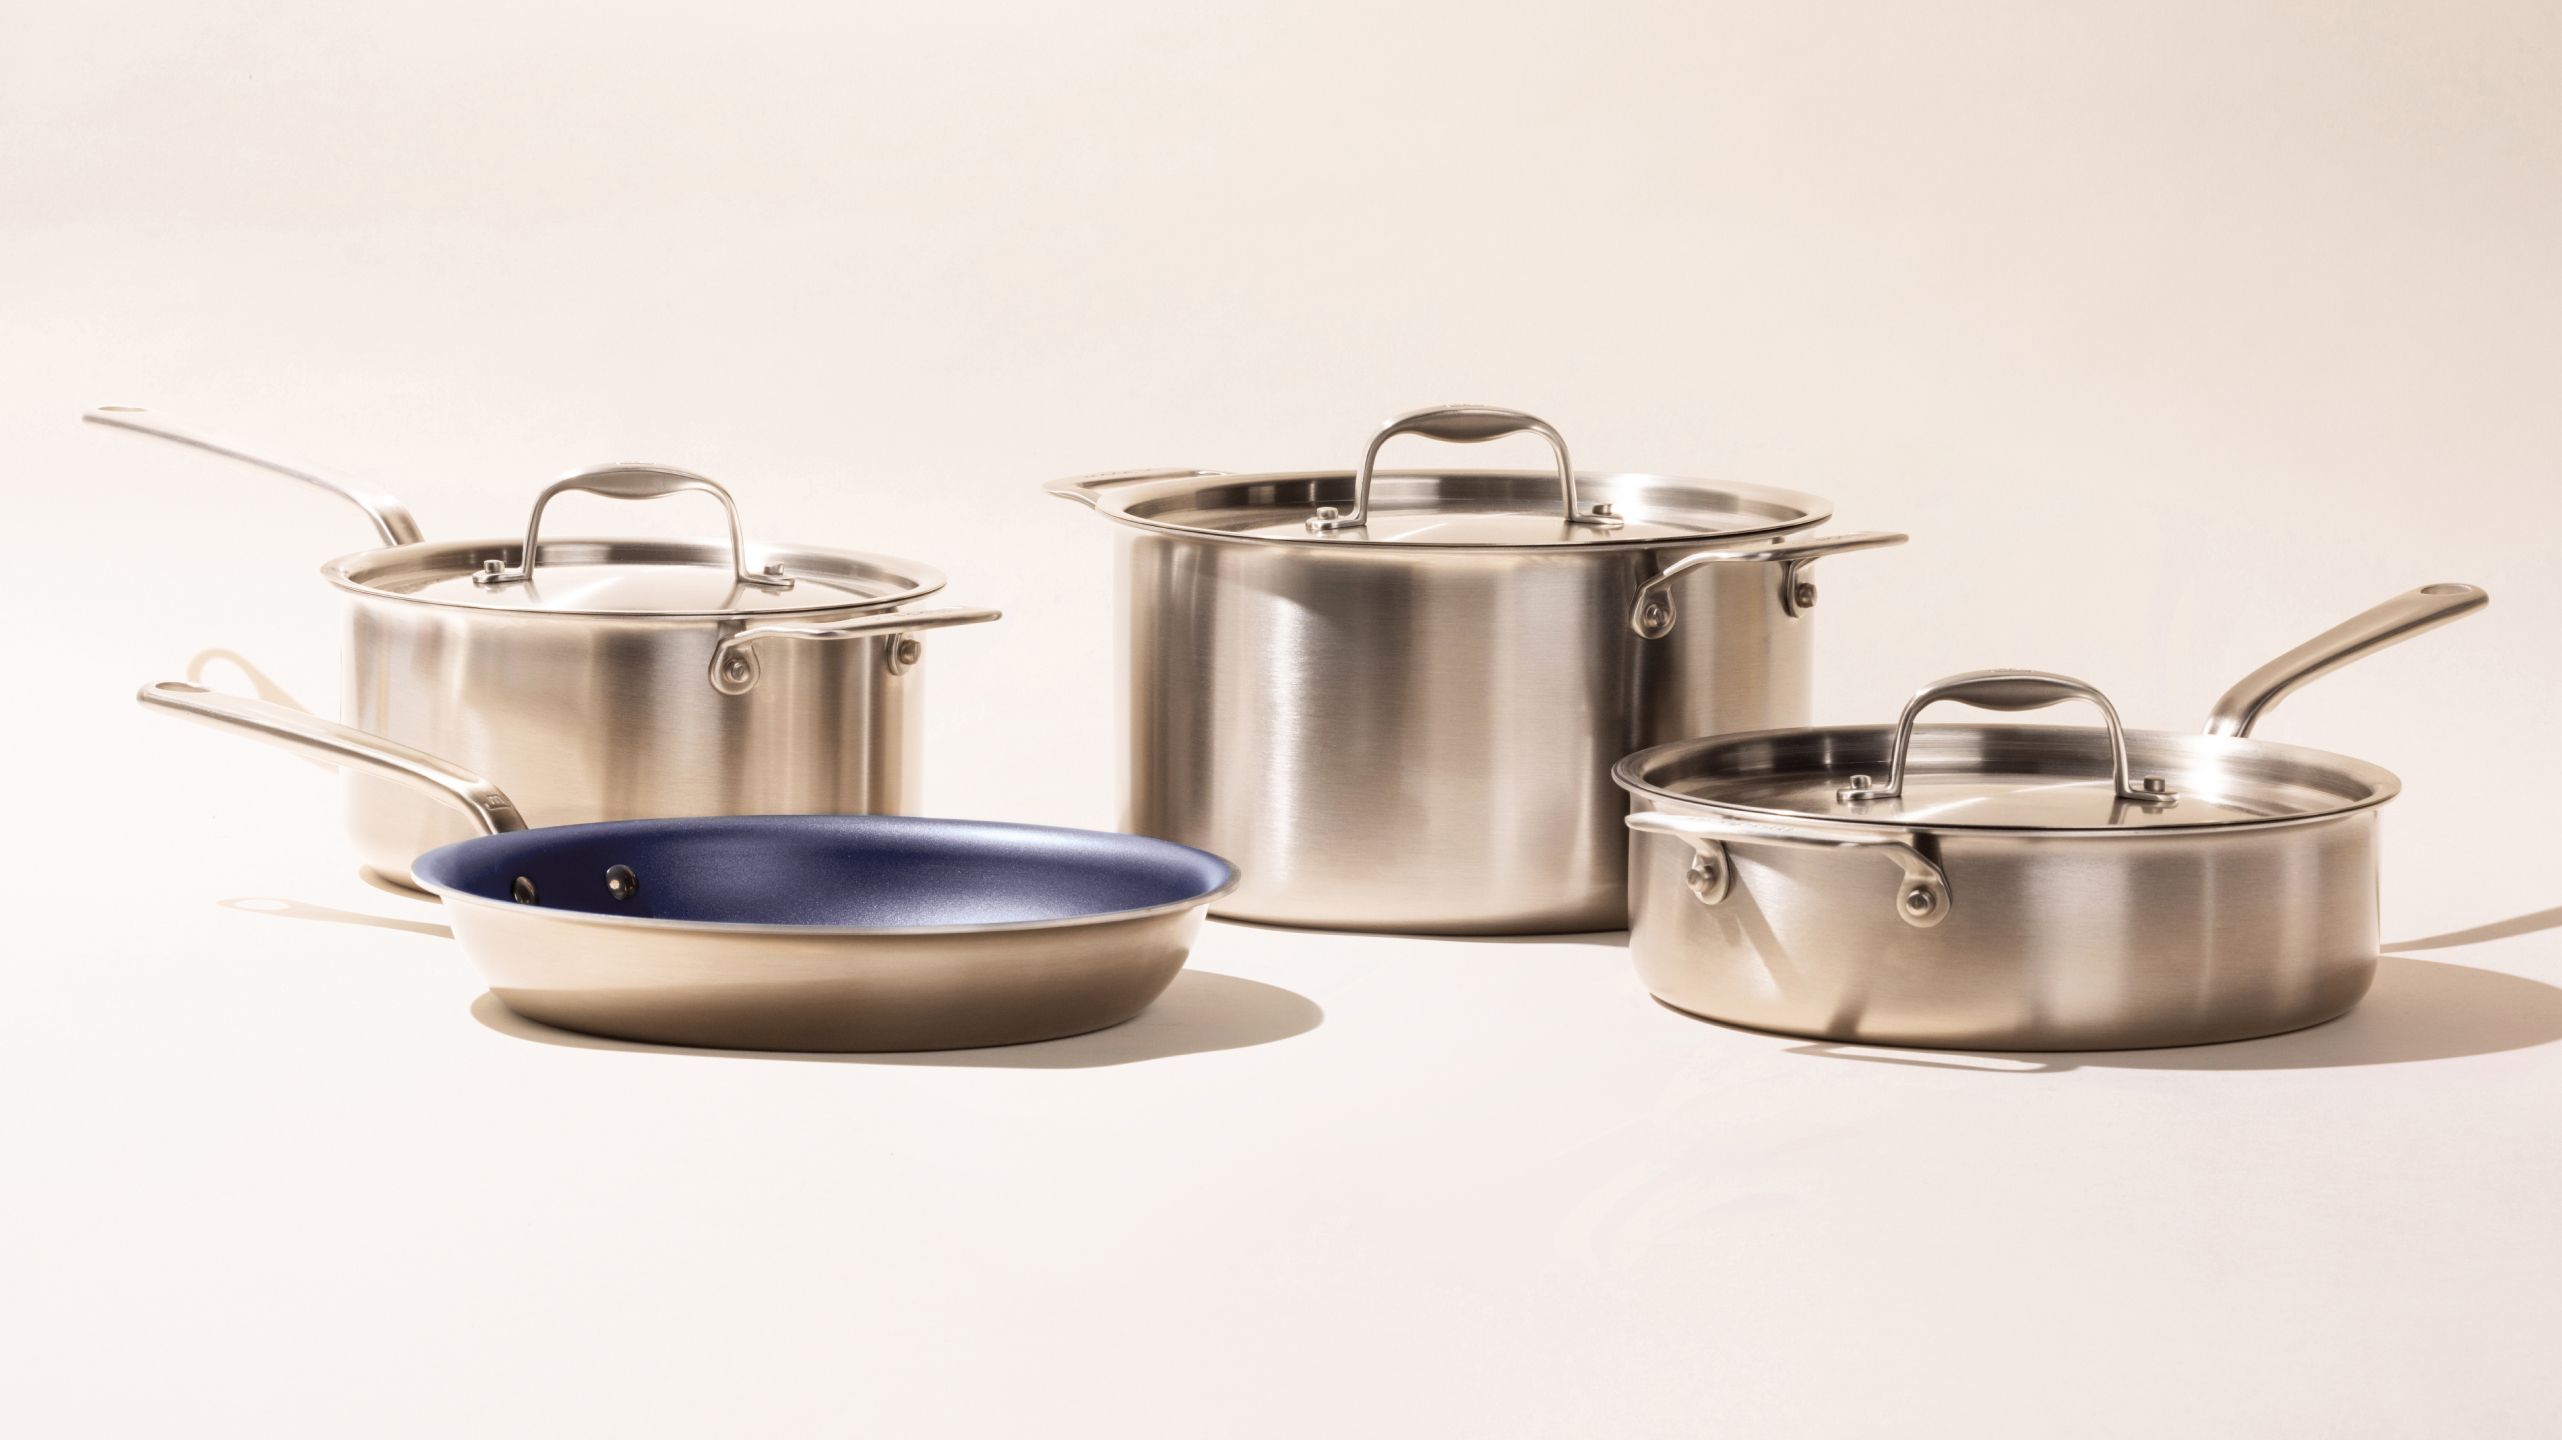 7 Piece Cookware Set • Your Guide to American Made Products